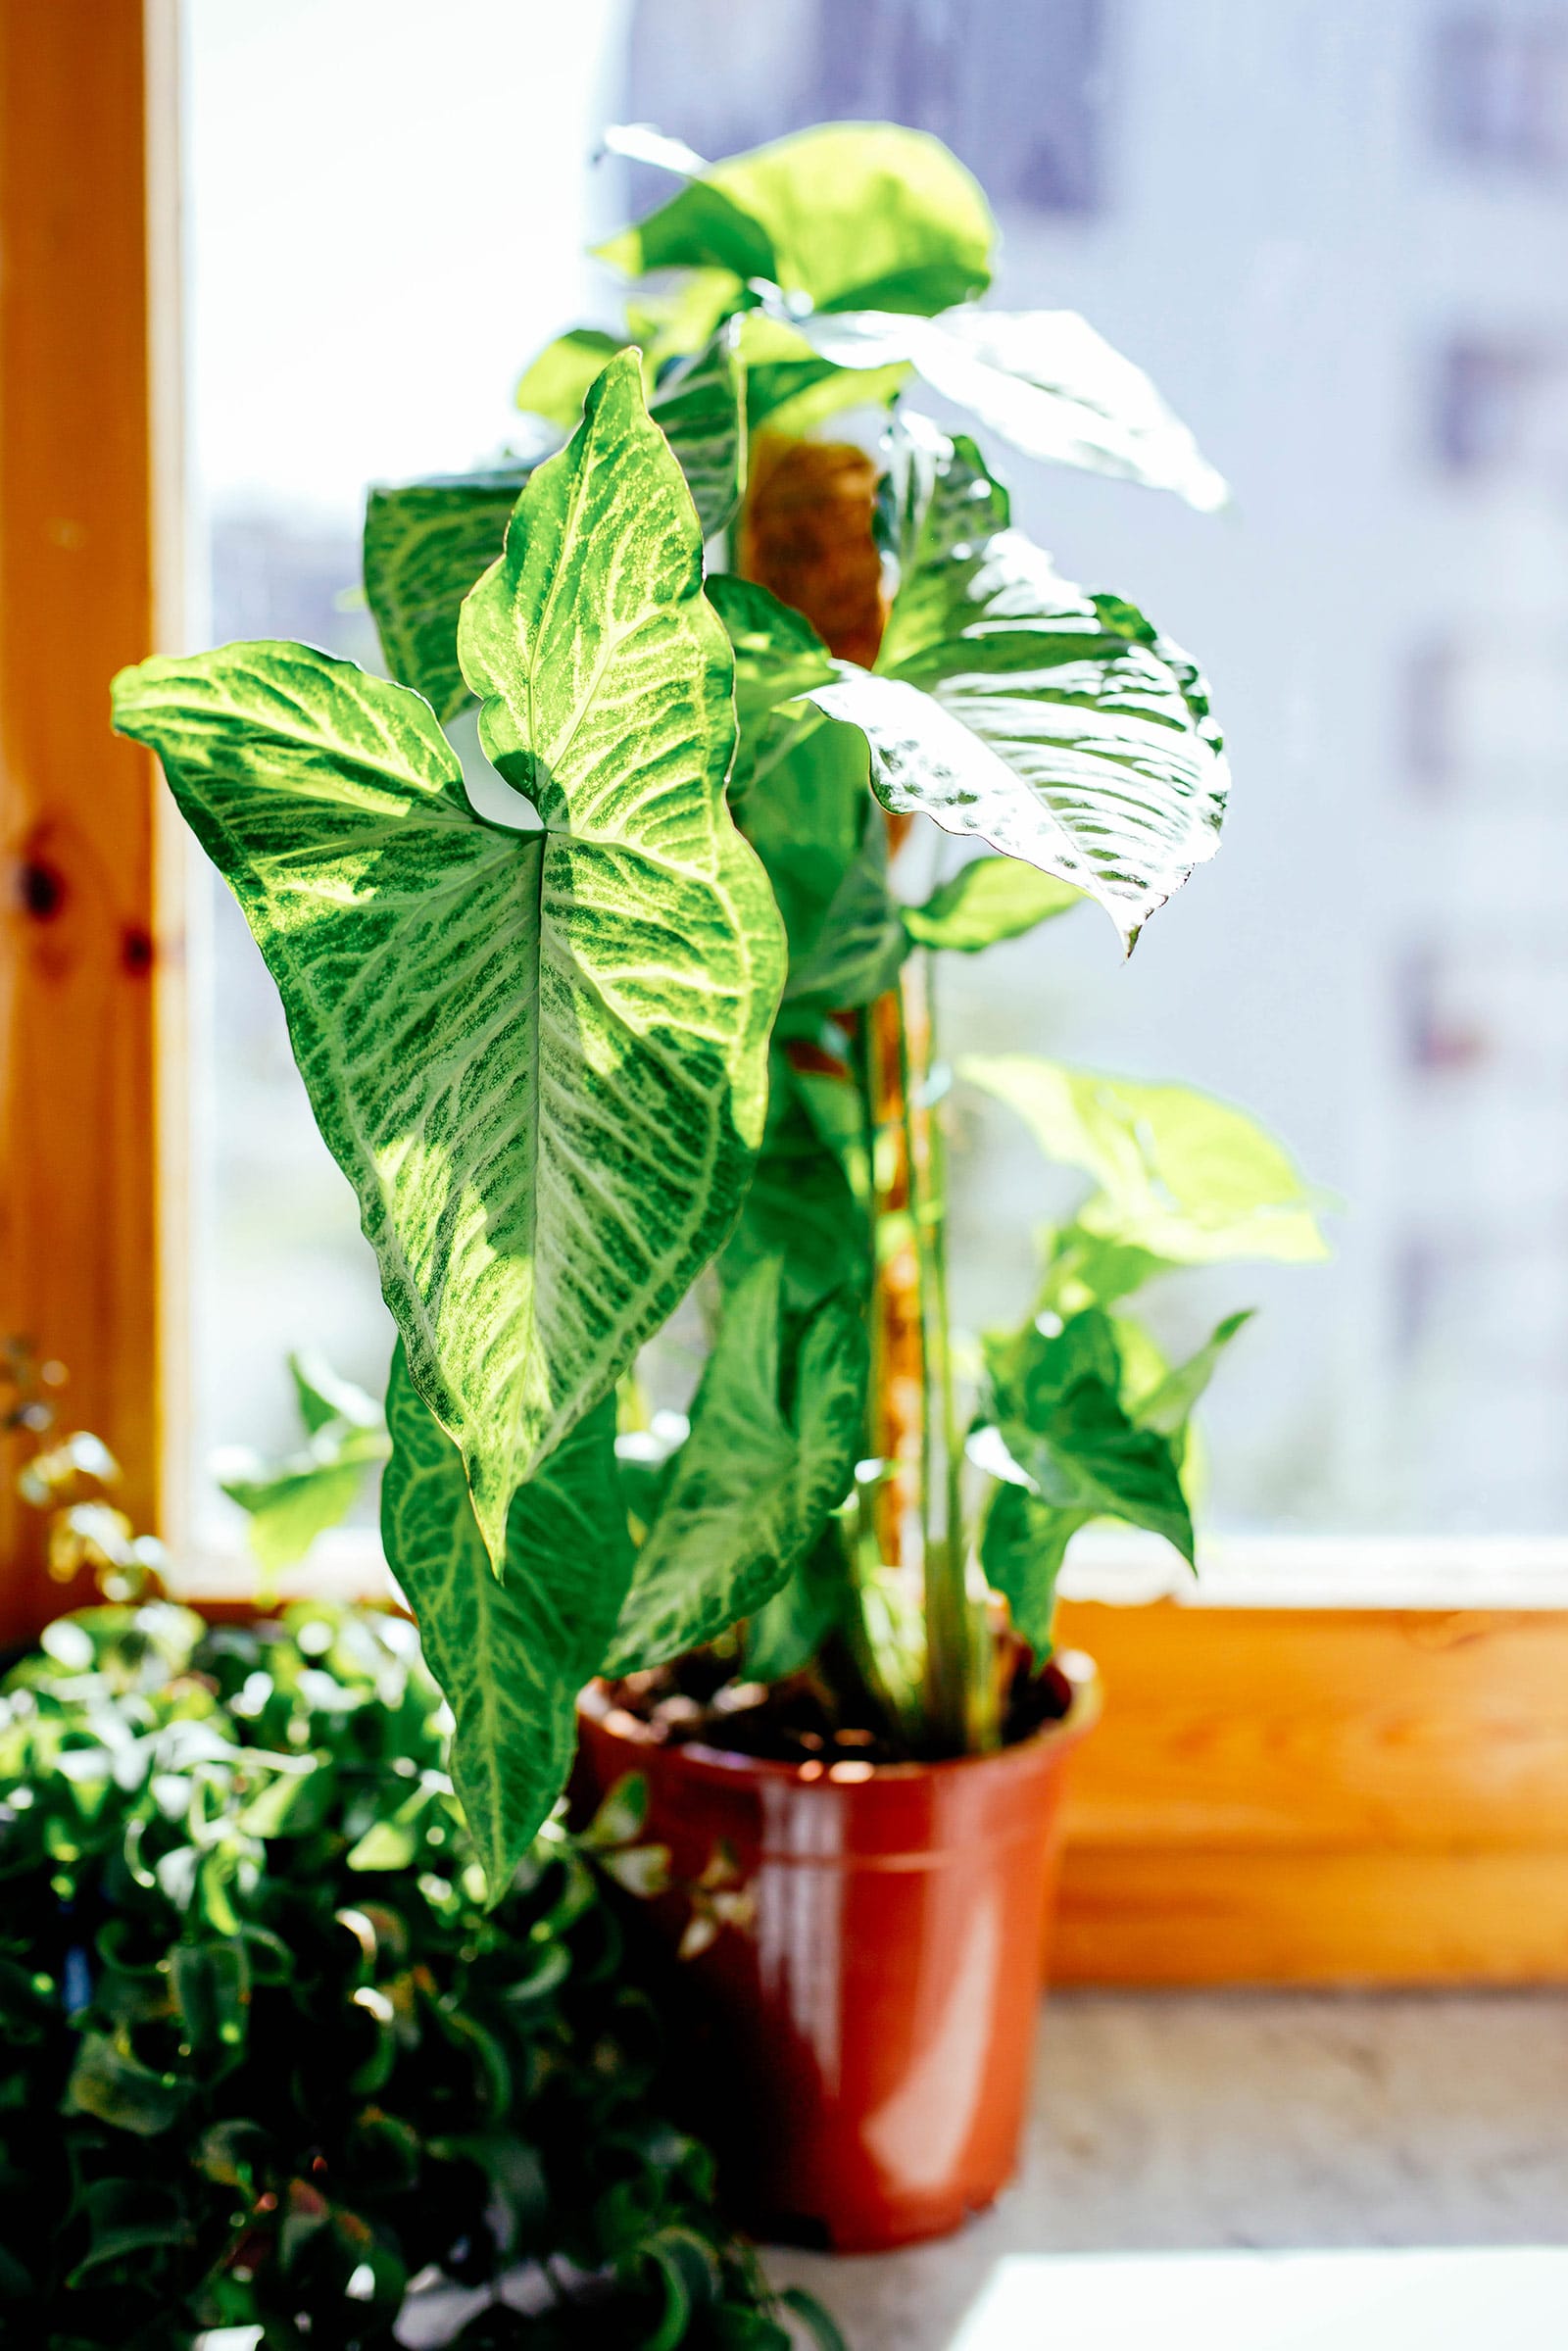 Arrowhead plant: complete care and propagation guide for Syngonium podophyllum